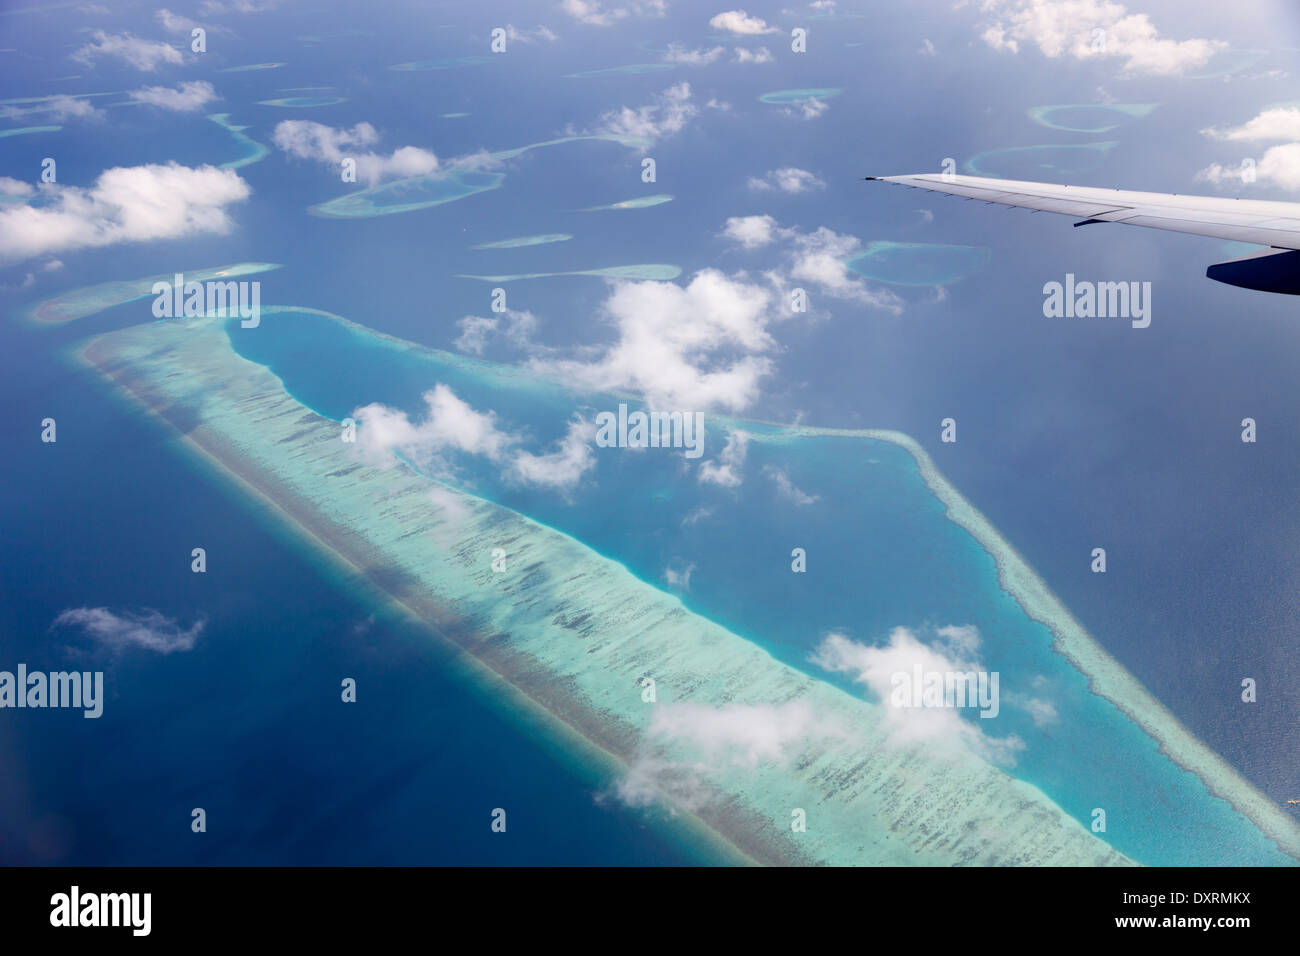 View from the window of an airplane flying above the Maldive Islands in the Indian Ocean 5 Stock Photo